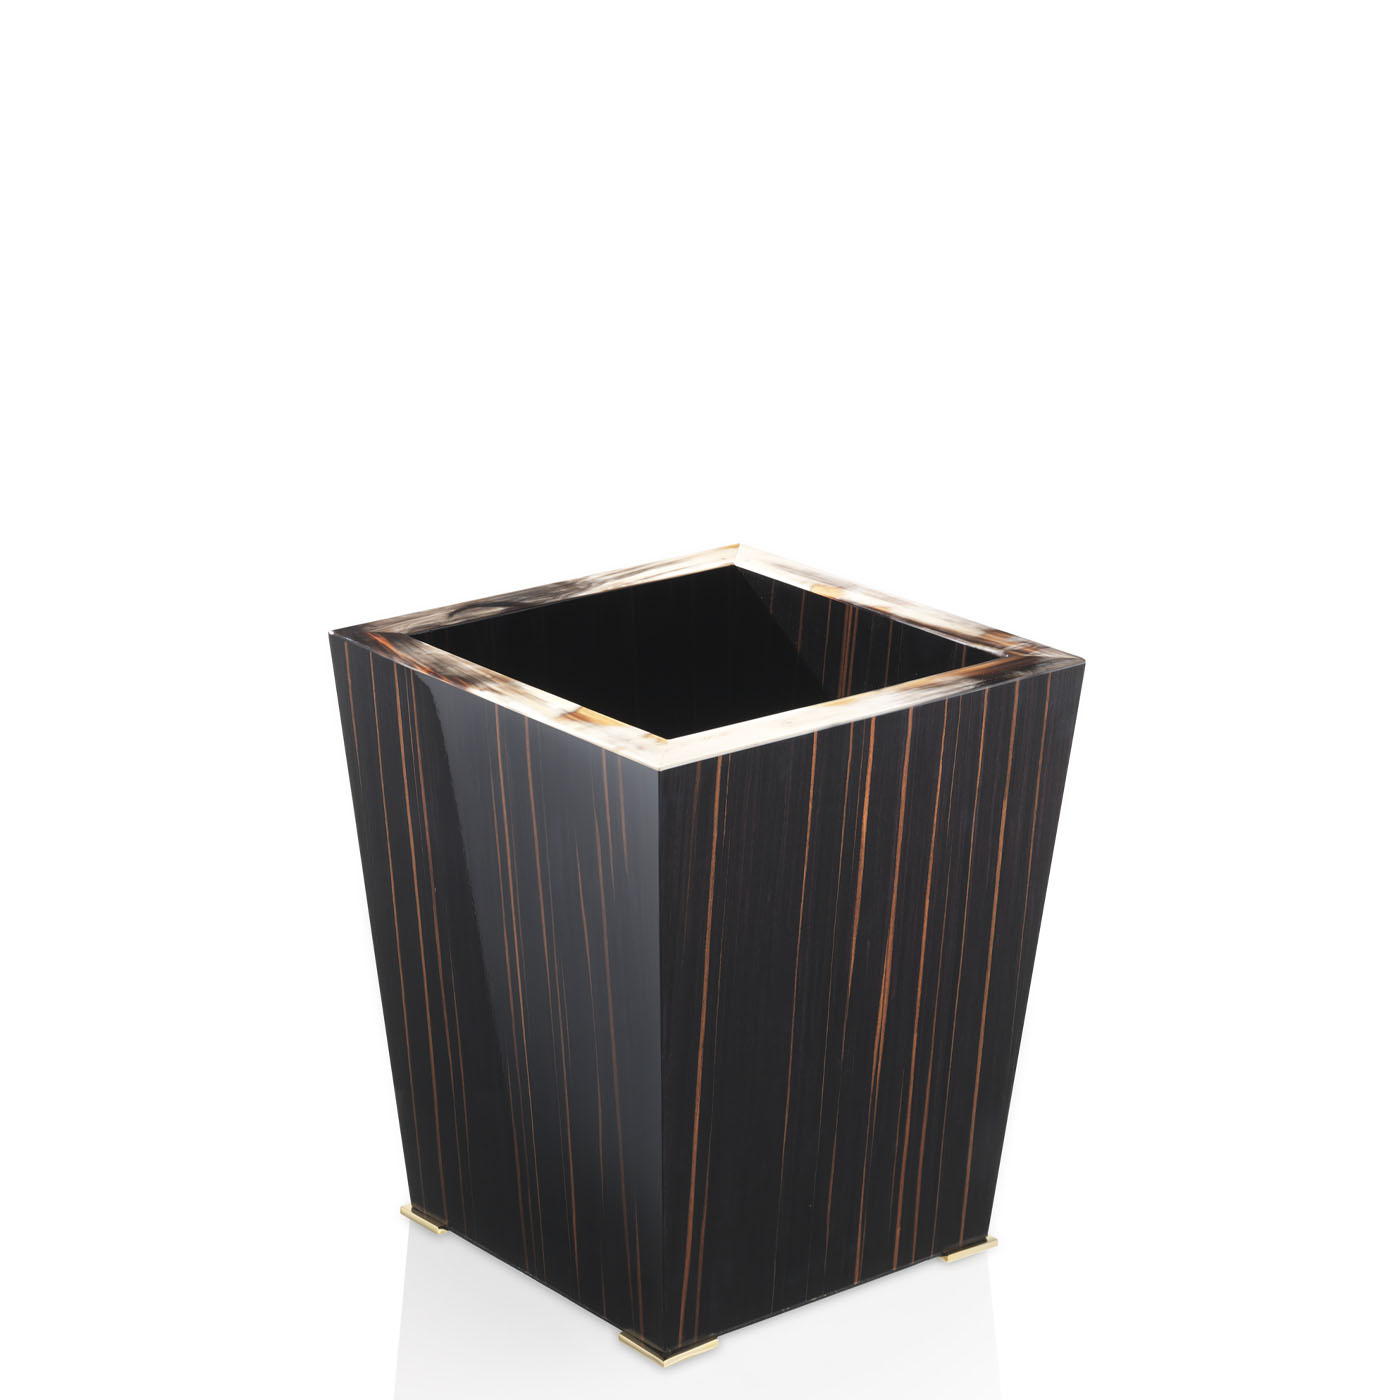 Bath sets - Fedro waste paper basket in horn and glossy ebony - Arcahorn